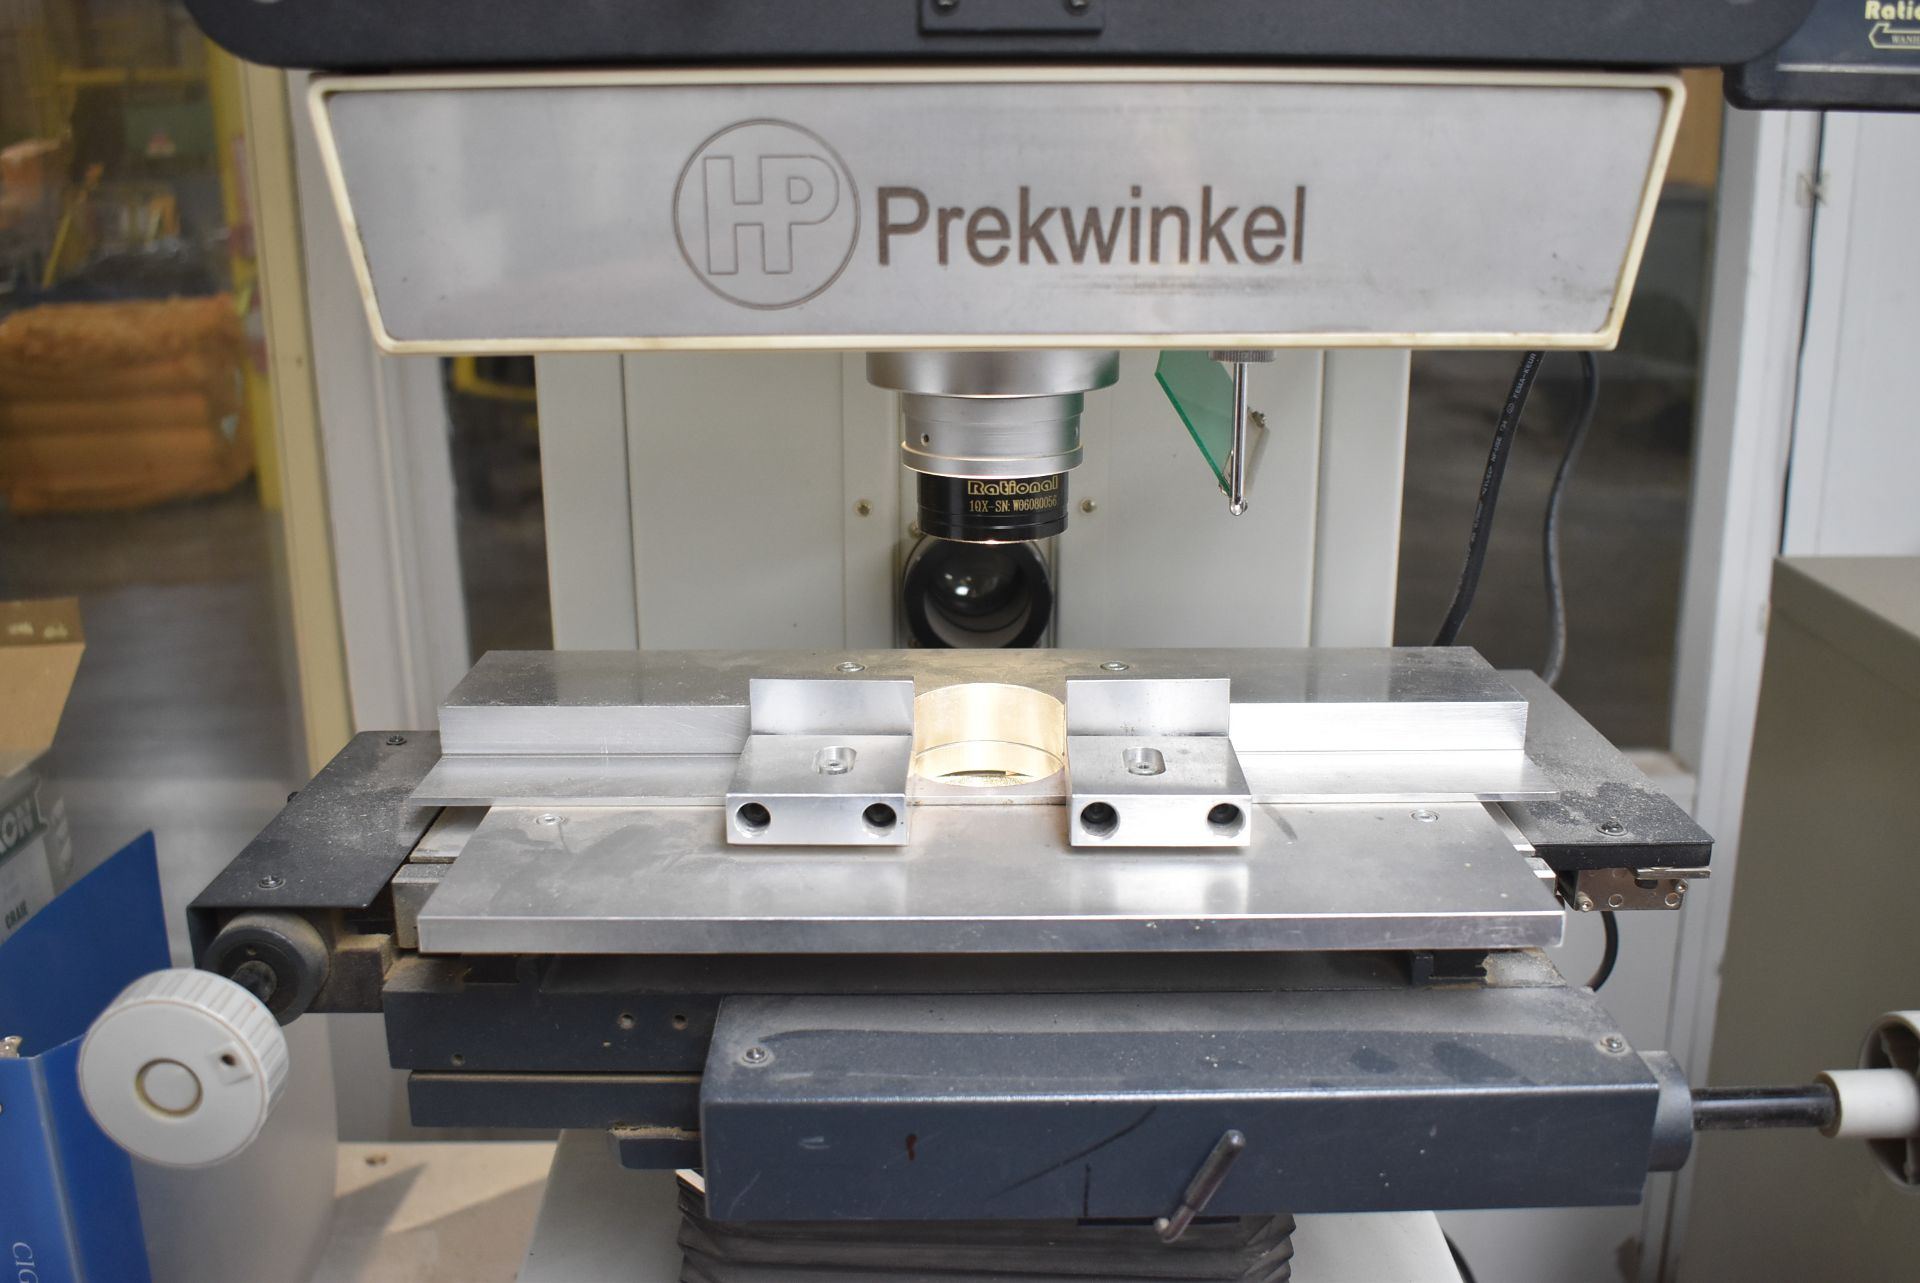 HP PREKWINKEL 12" OPTICAL COMPARATOR WITH RATIONAL DC-3000 3-AXIS DRO, S/N: 06070563 - Image 3 of 5